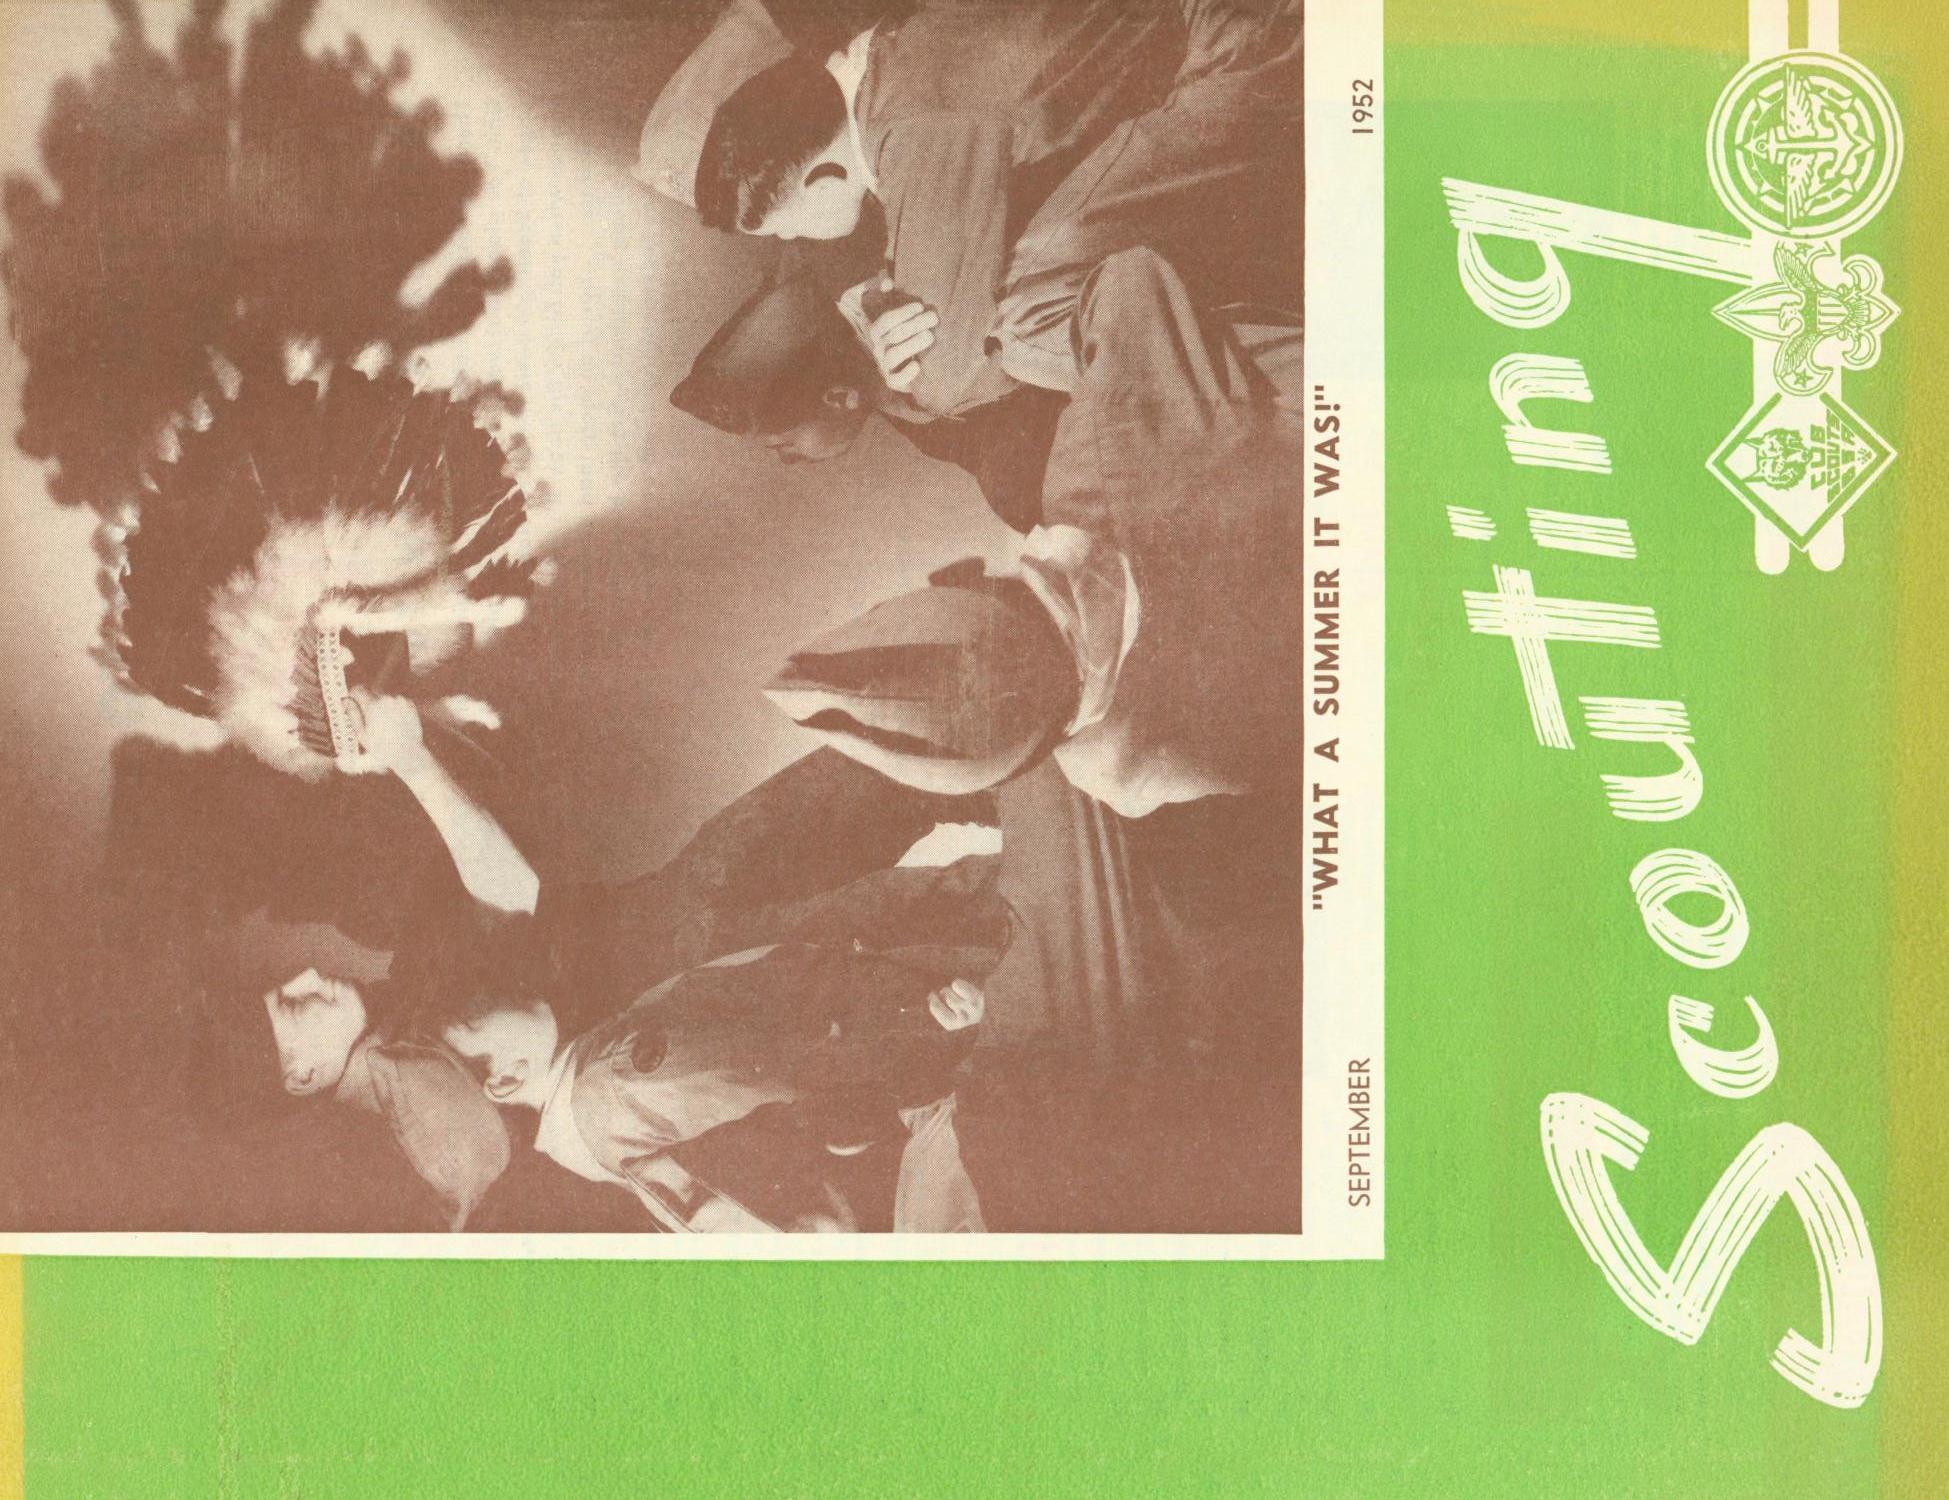 Scouting, Volume 40, Number 7, September 1952
                                                
                                                    Front Cover
                                                